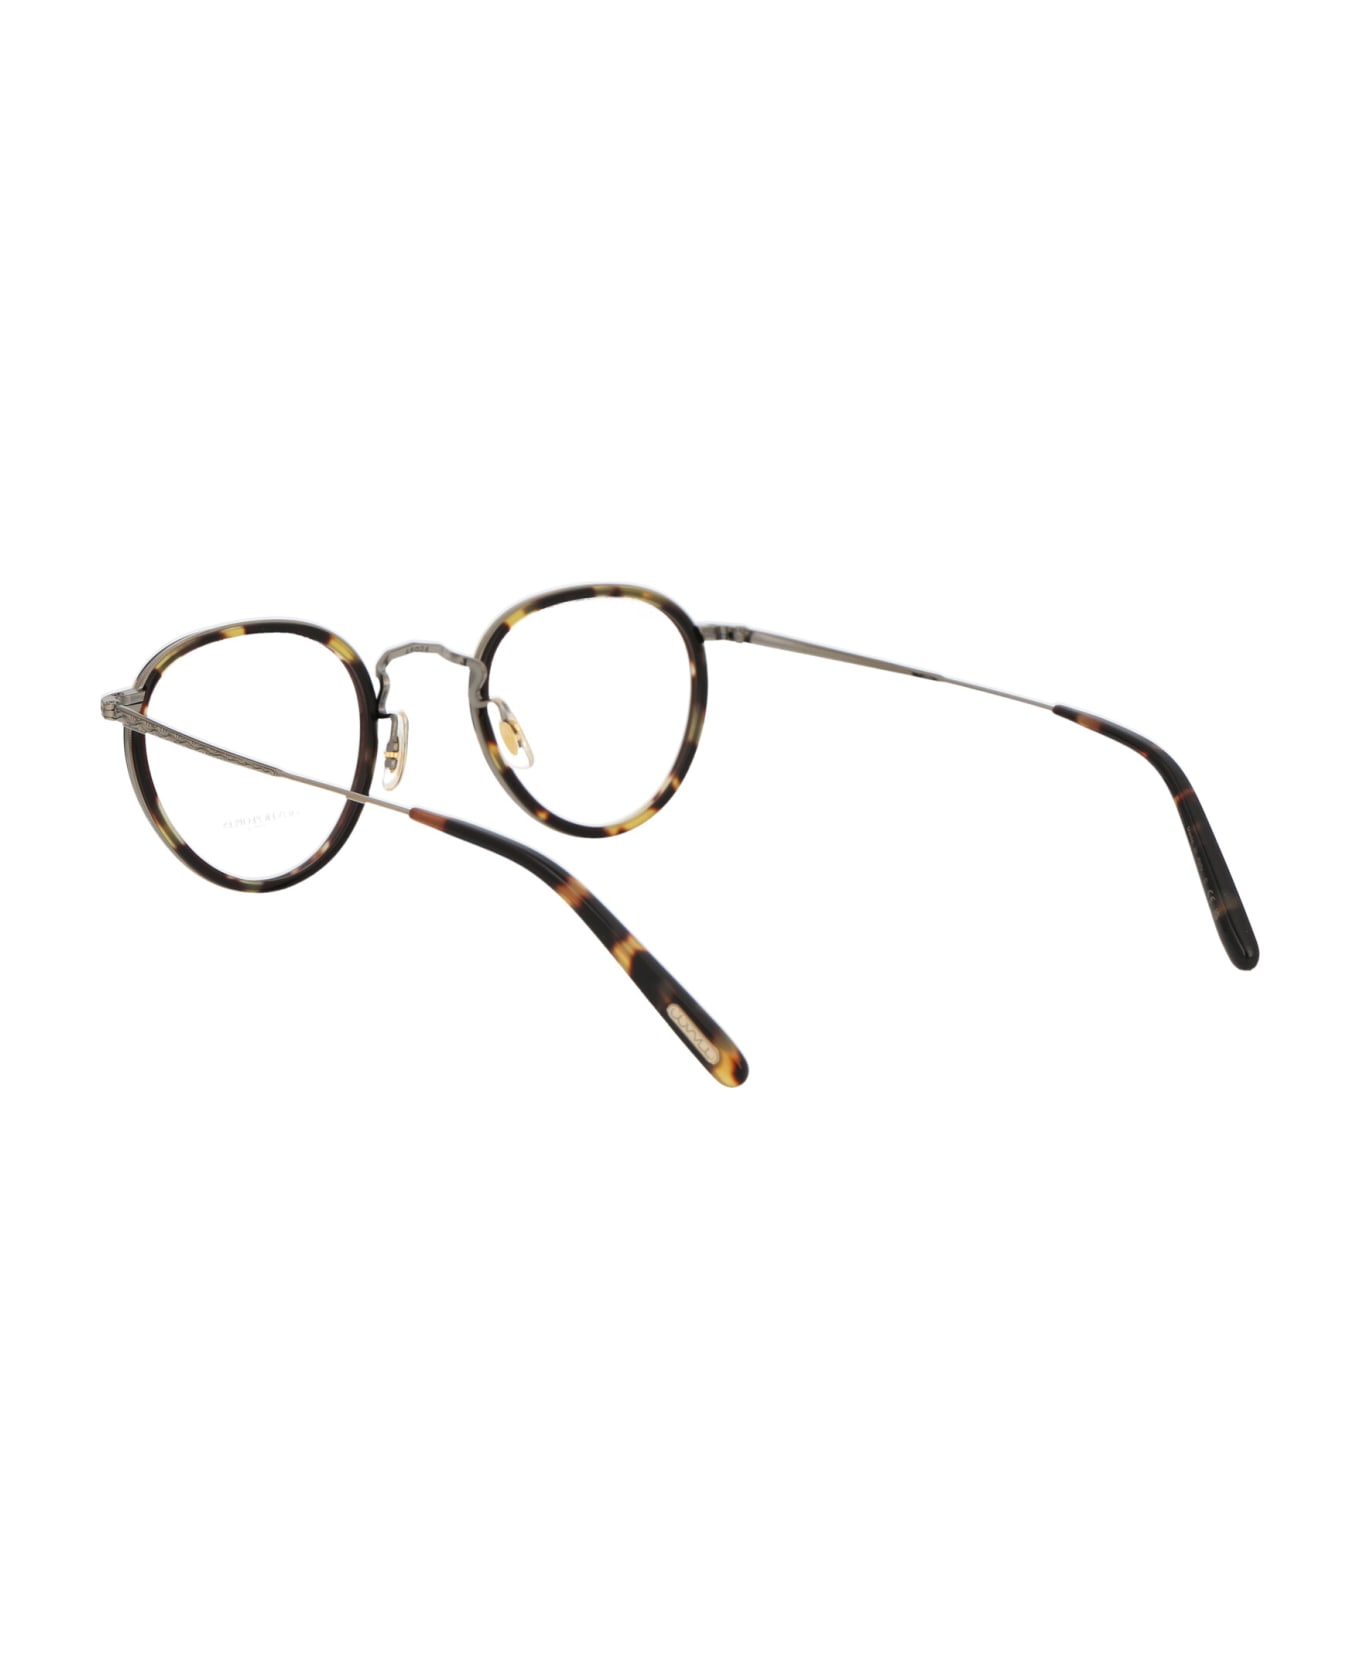 Oliver Peoples Mp-2 Glasses - 5039 WARNING: California Proposition 65